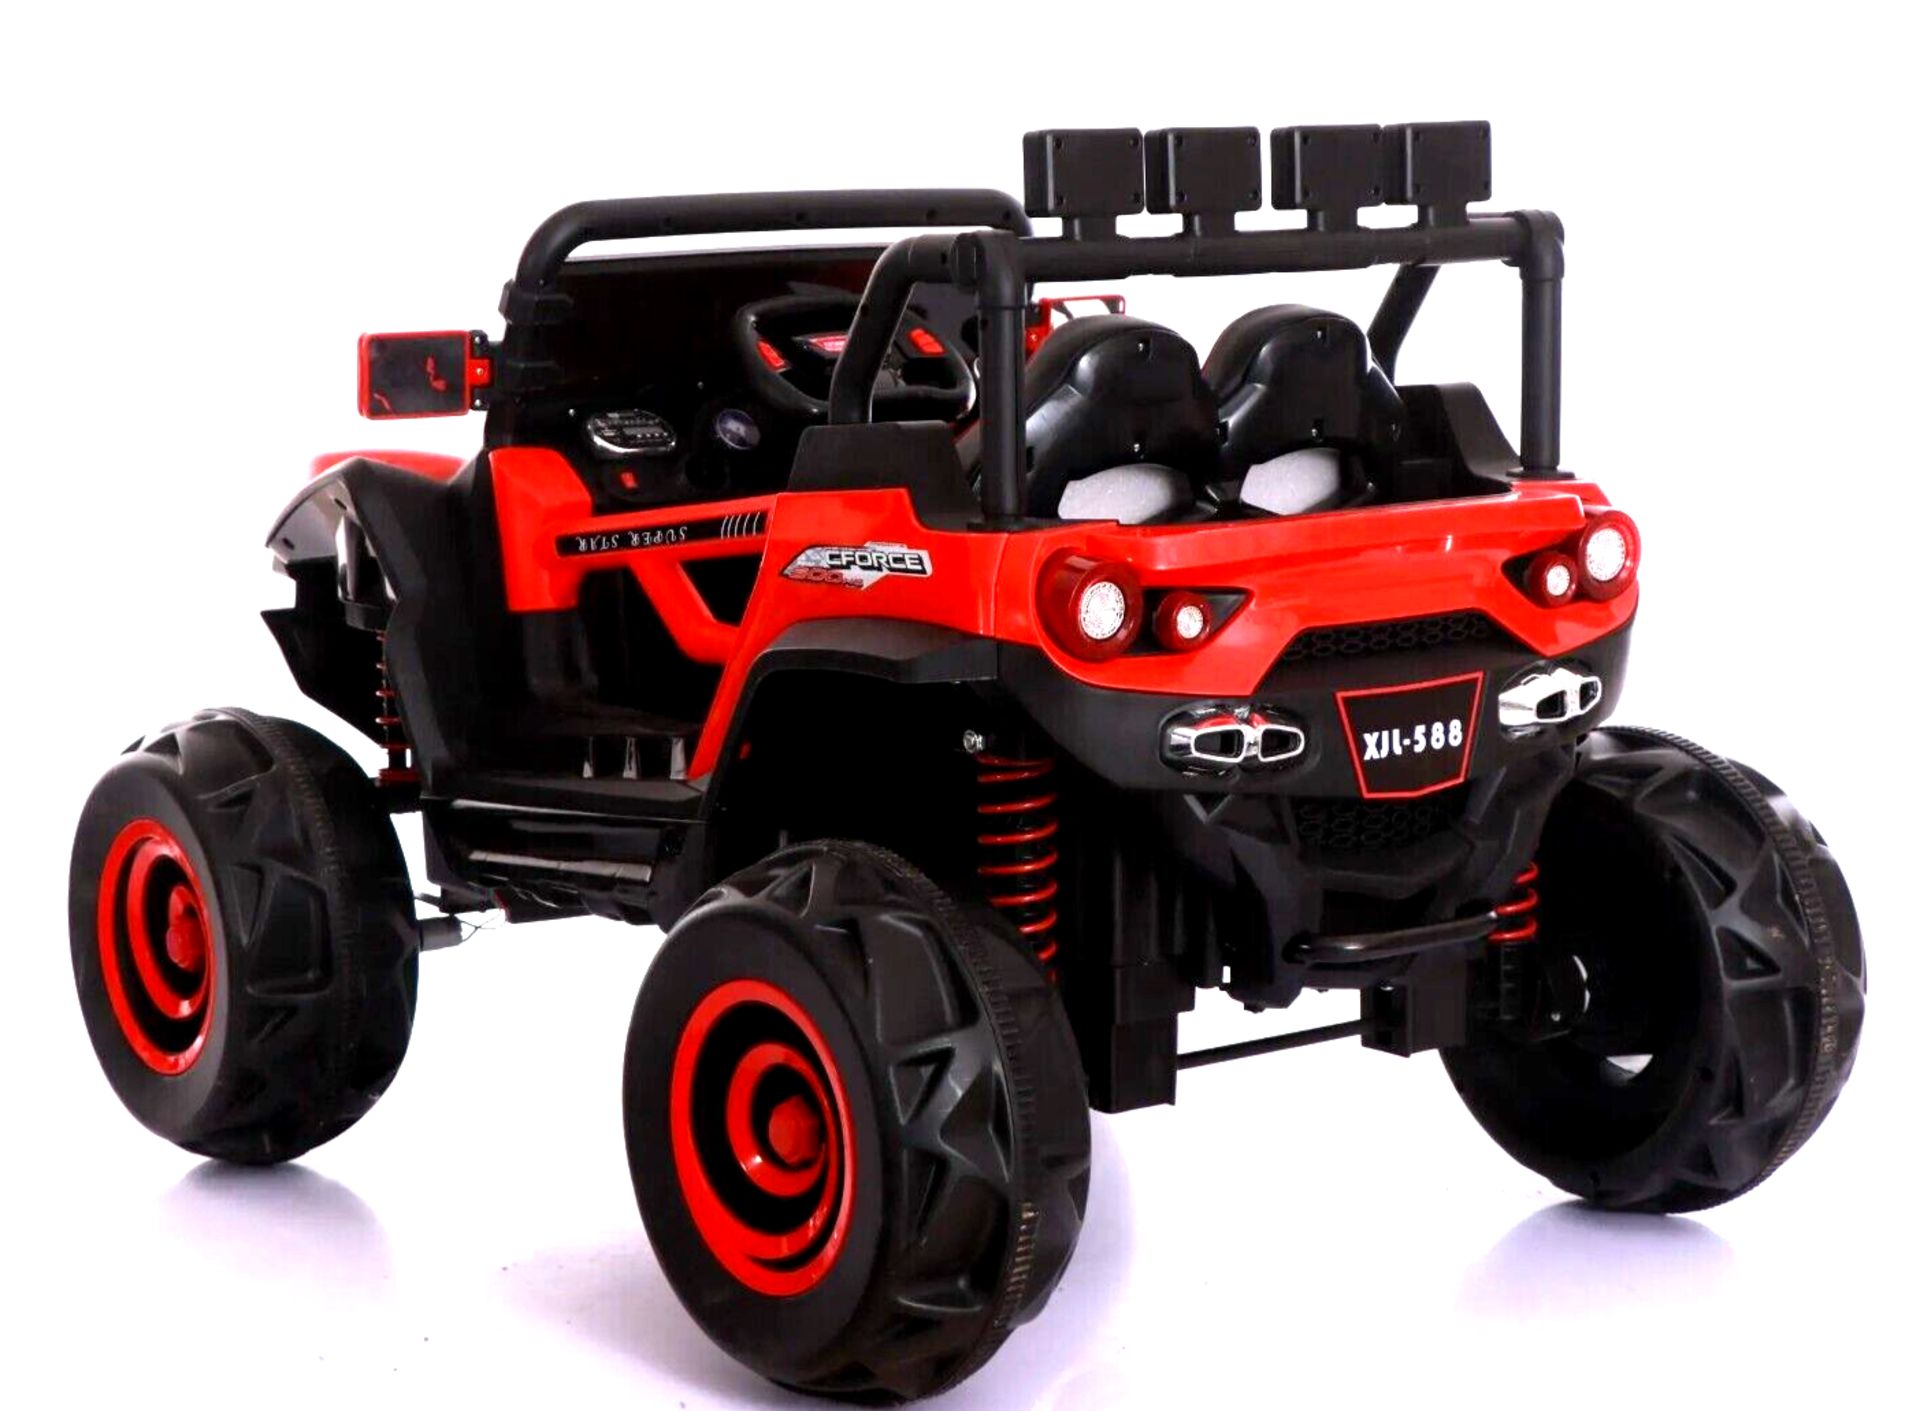 RED 4X4 ATV/UTV KIDS BUGGY JEEP ELECTRIC CAR WITH REMOTE BRAND NEW BOXED - Image 3 of 4